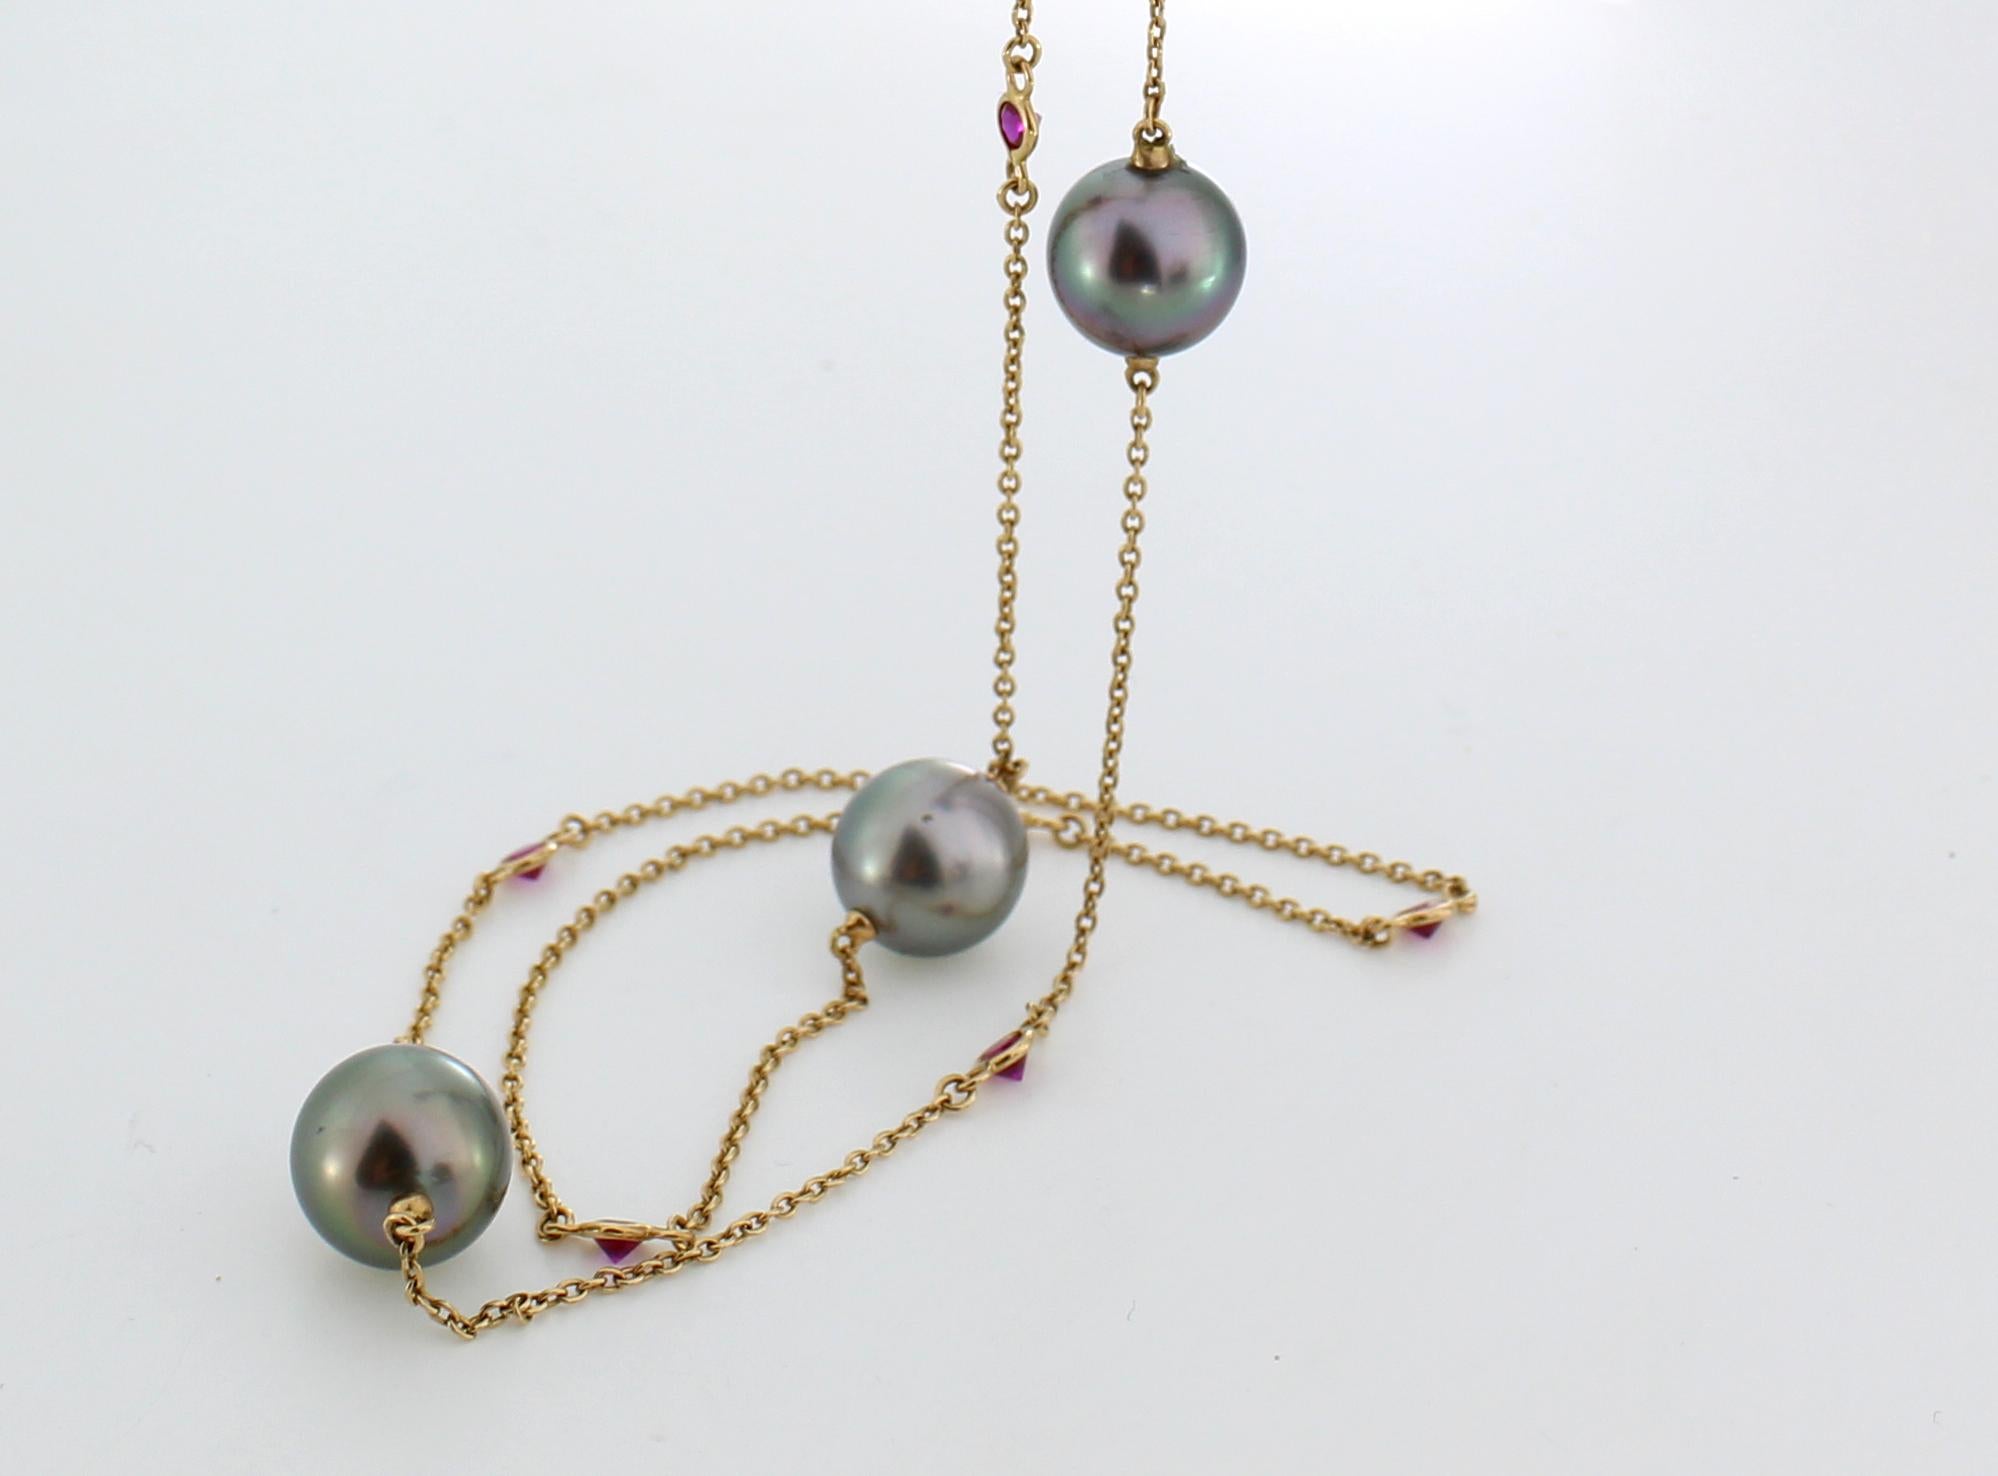 18k Rose Gold with Rubies (1.096ct) and 10mm Dark Green Round Near Round Tahitian Pearls (4 pieces). 